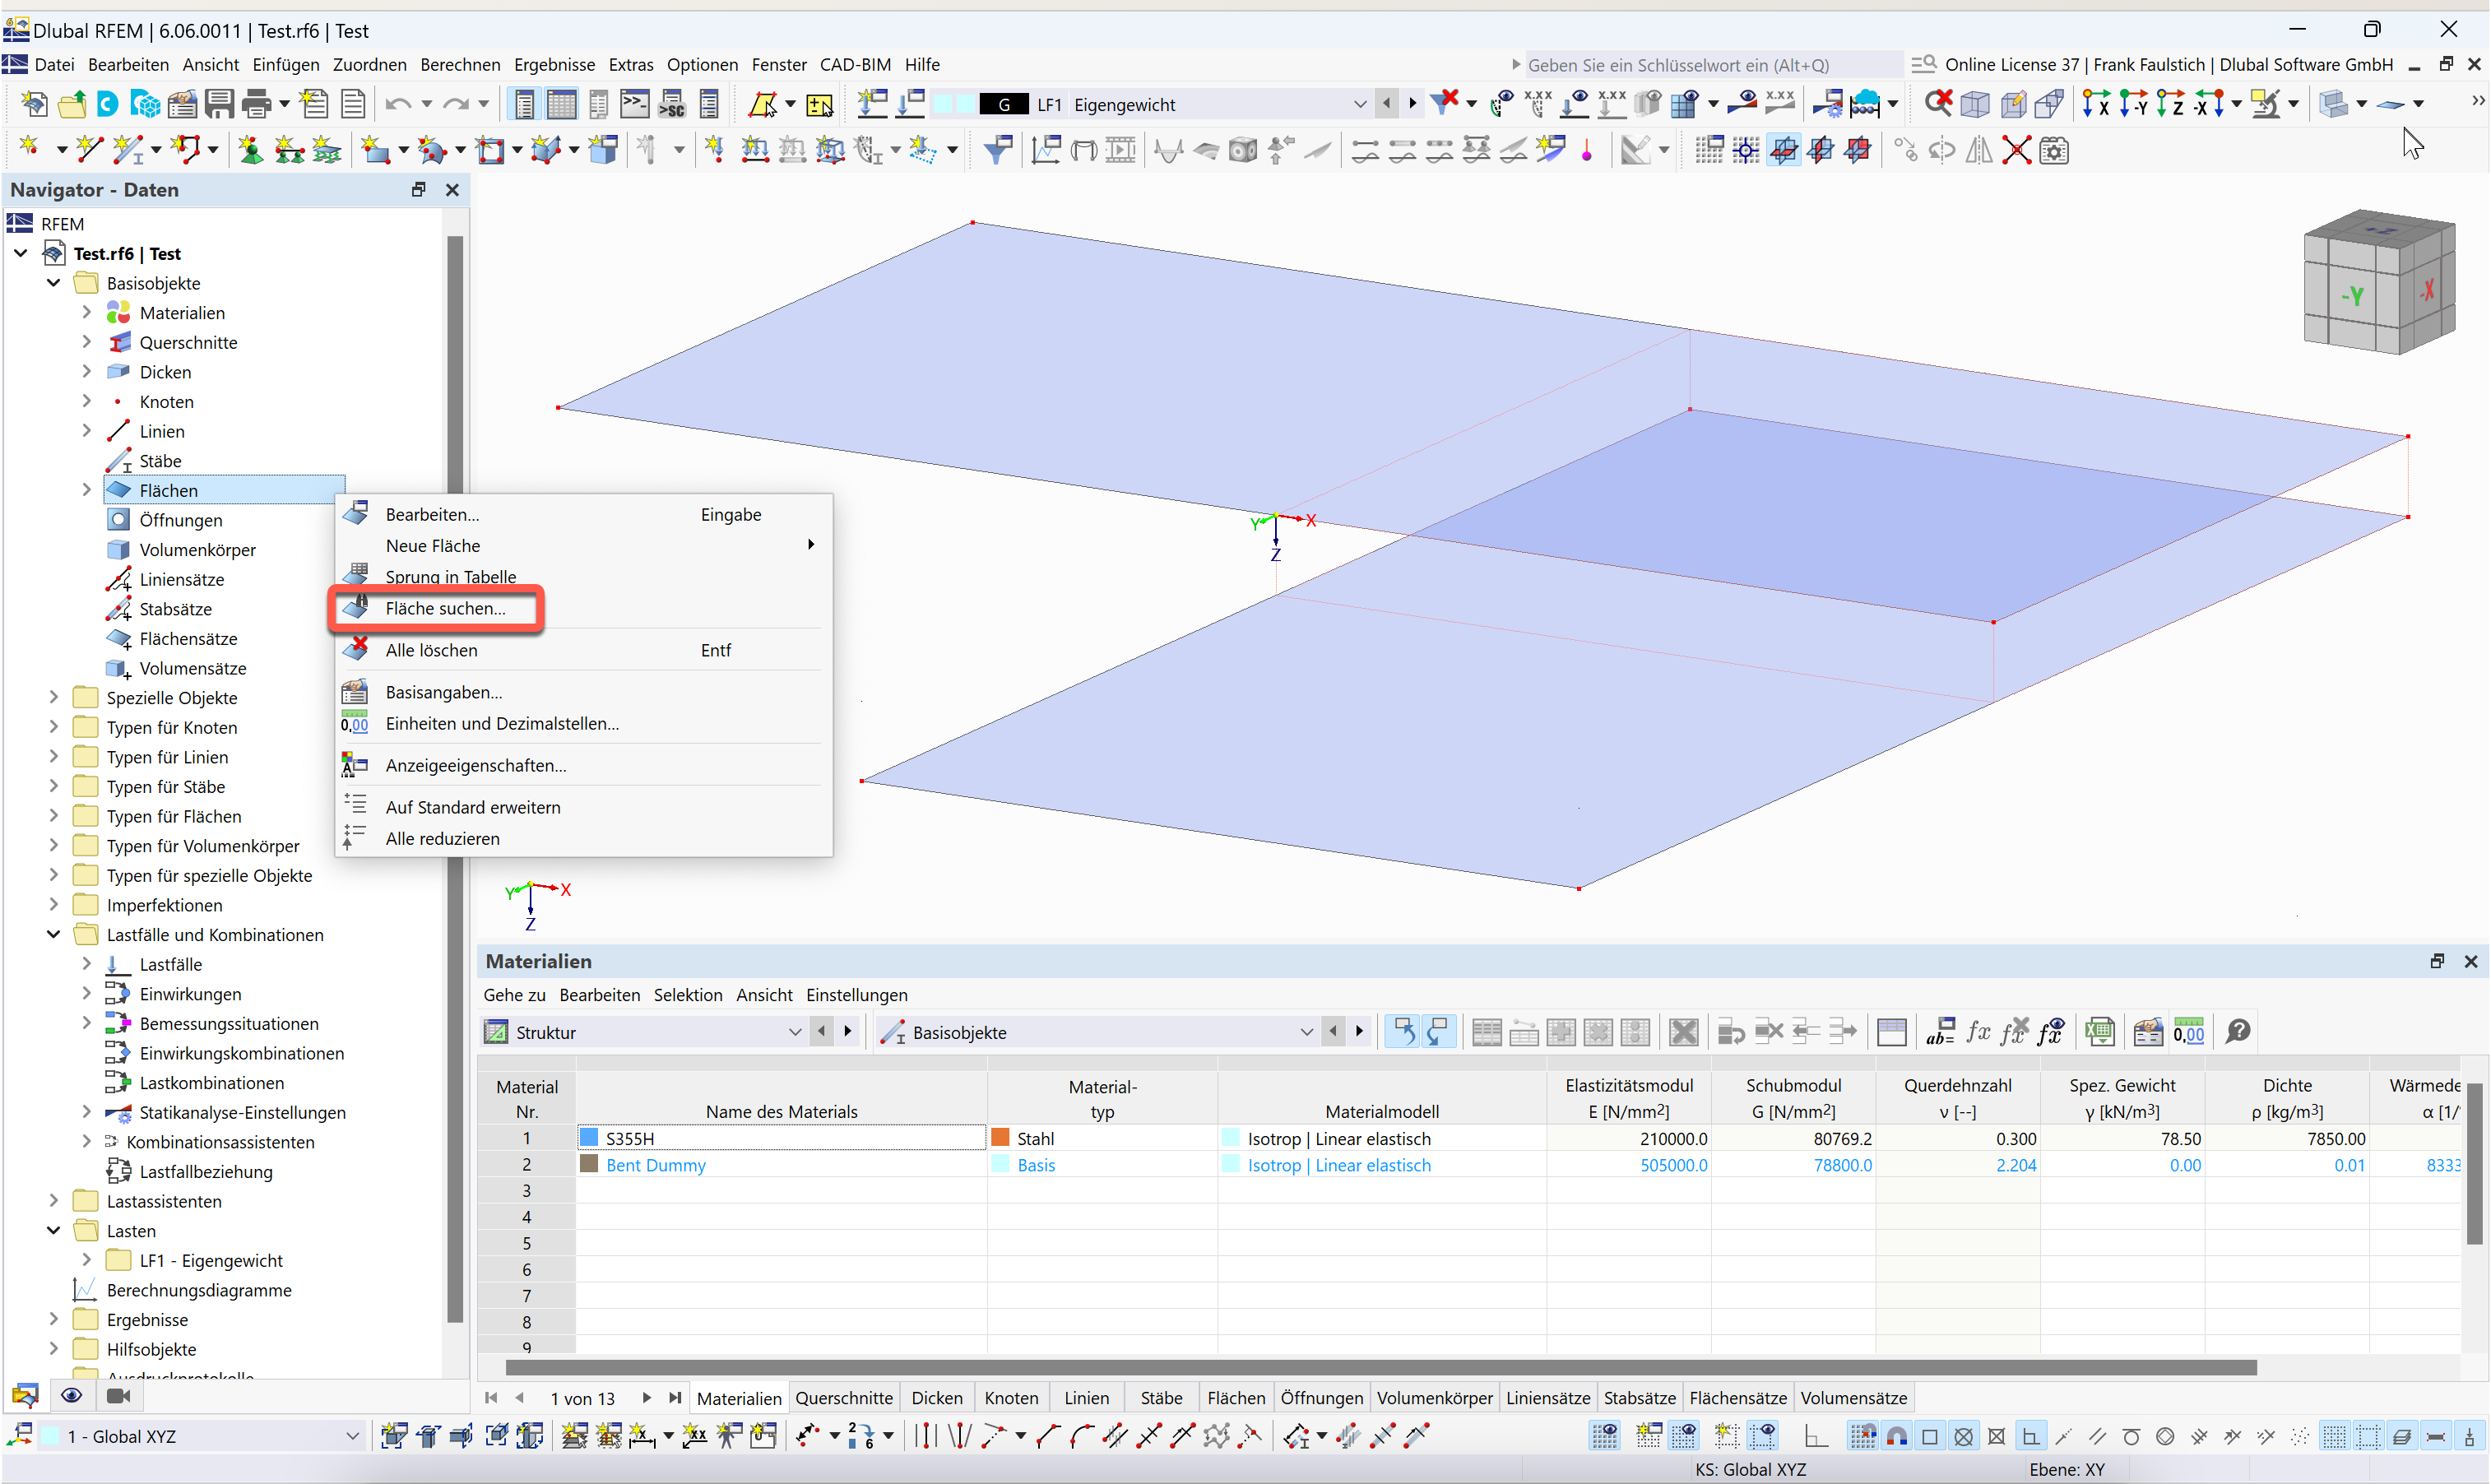 FAQ 005545 | How do I find a surface with a certain number in RFEM 6?